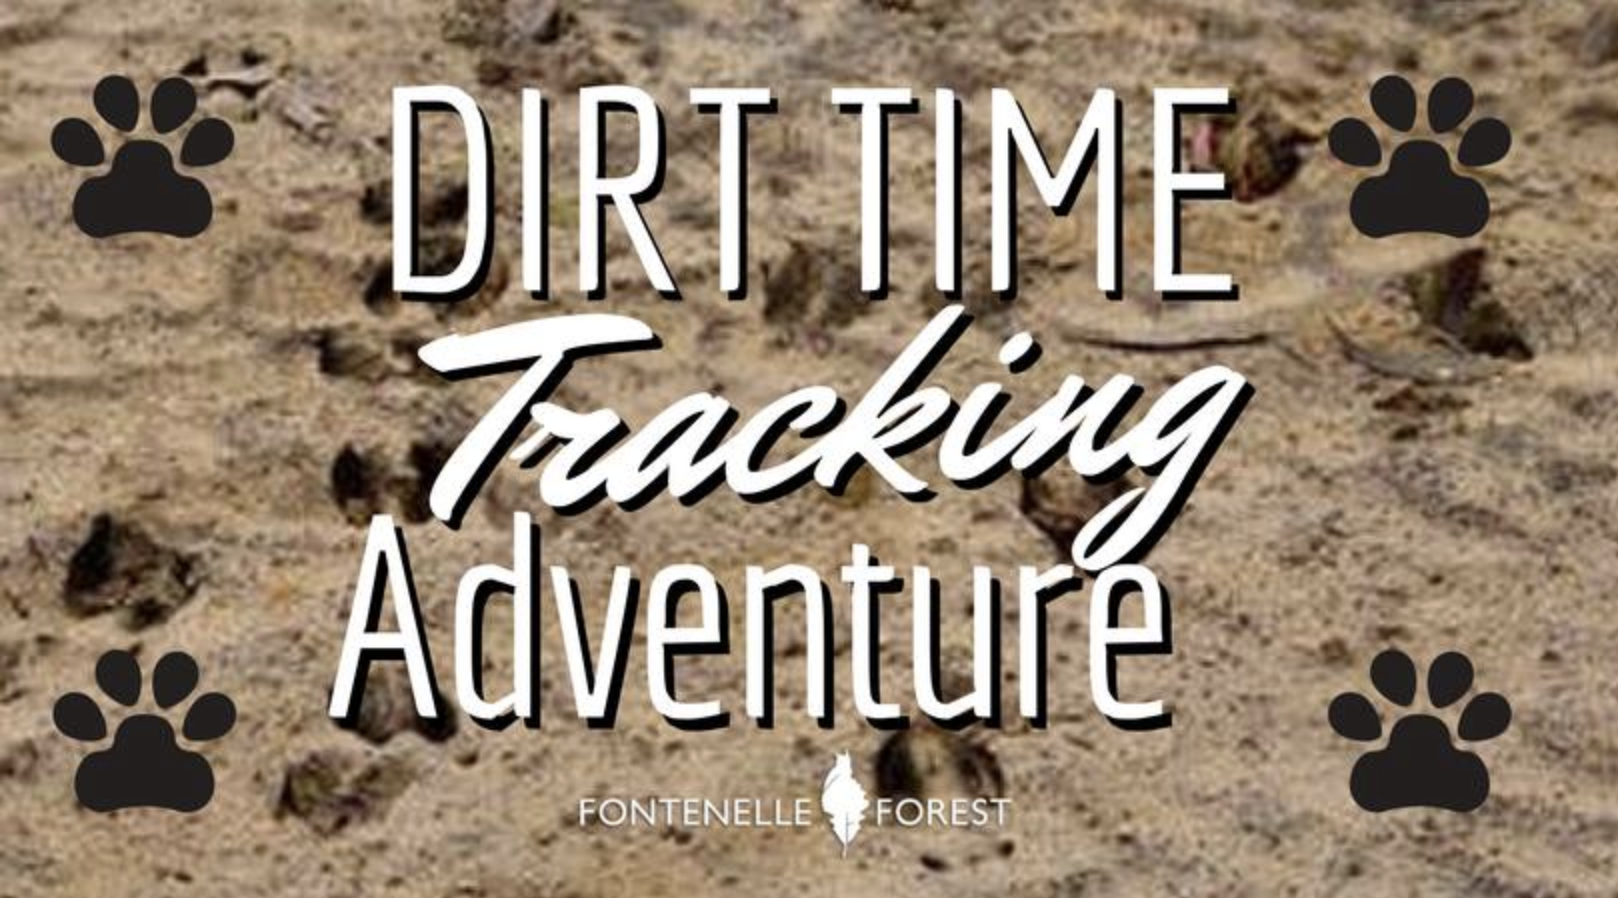 Picture of a dirt landscape with the text overlay " Dirt time tracking adventure"